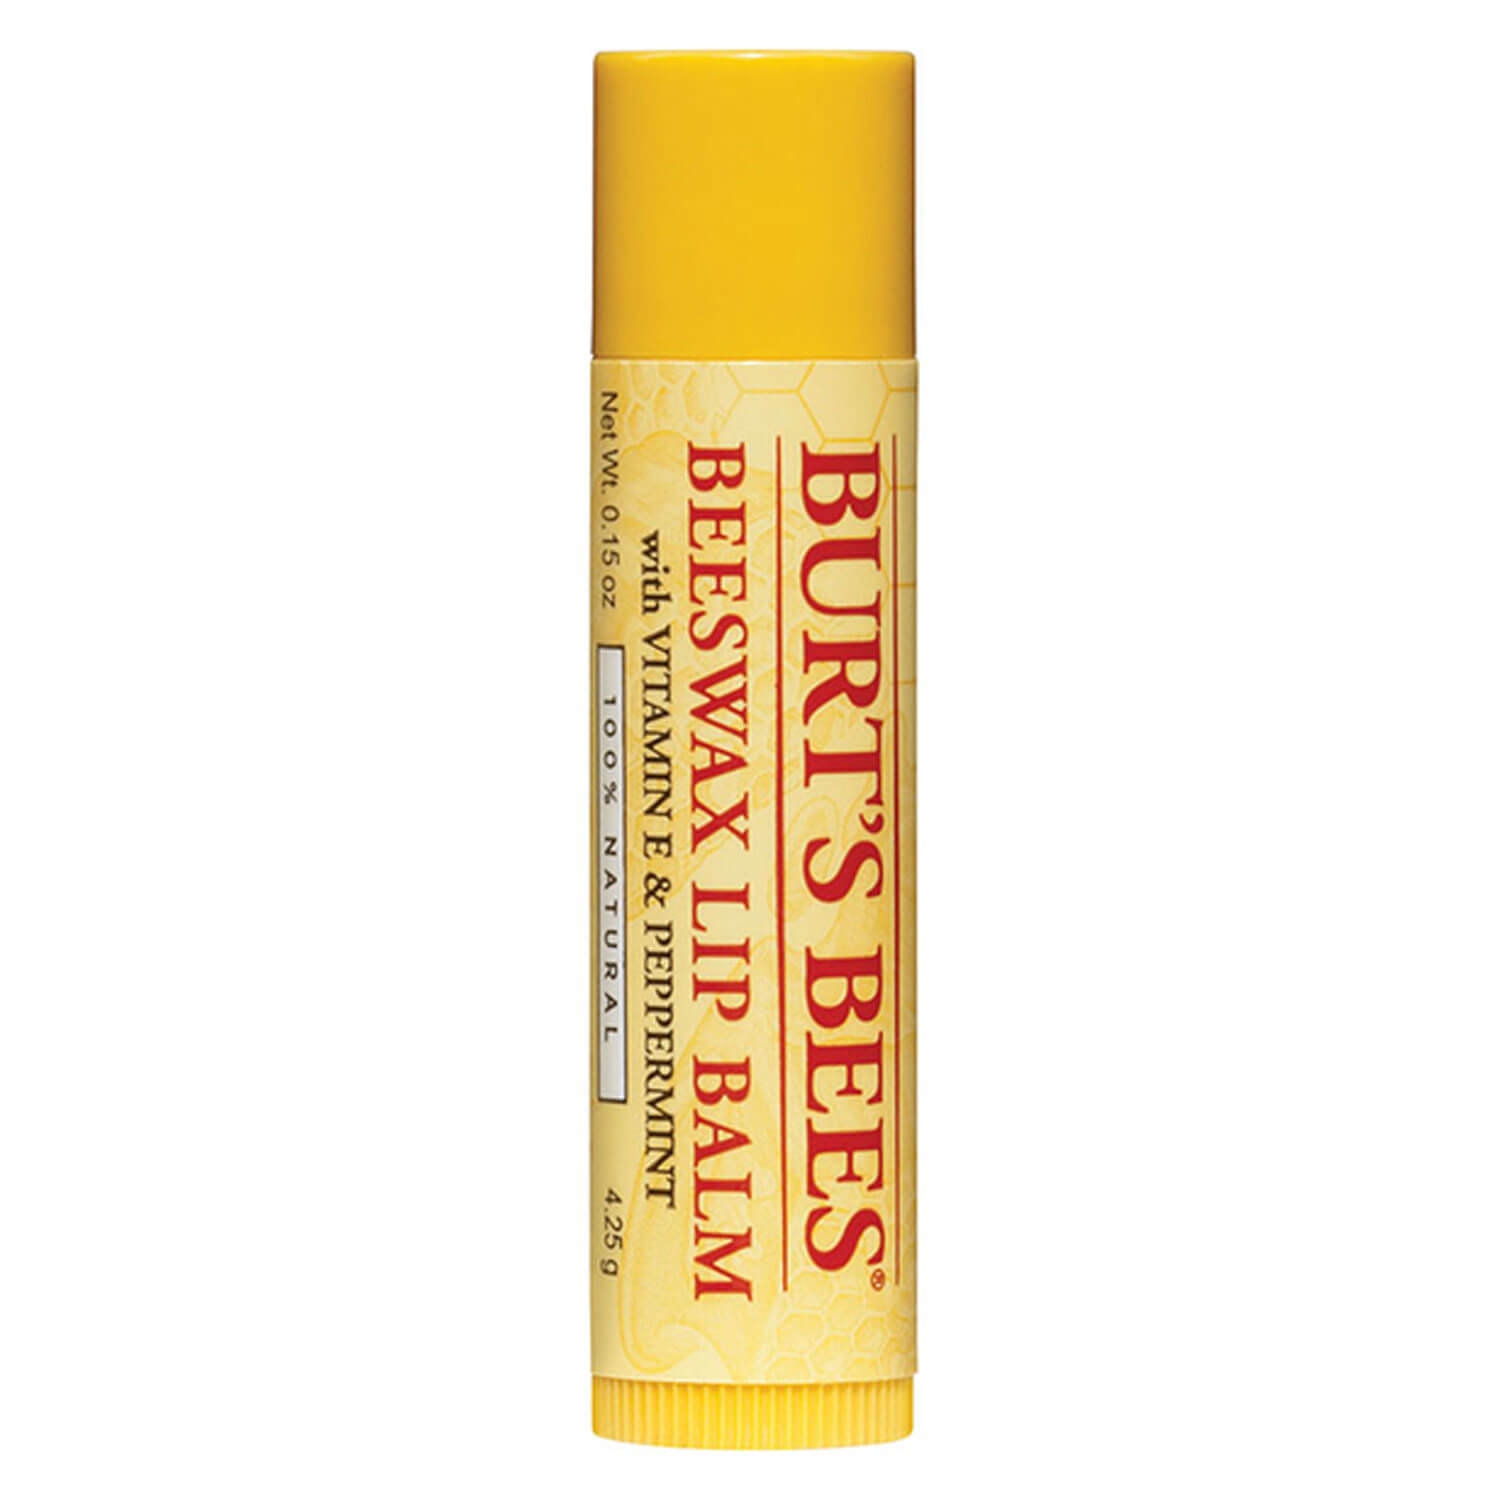 Product image from Burt's Bees - Lip Balm Beeswax